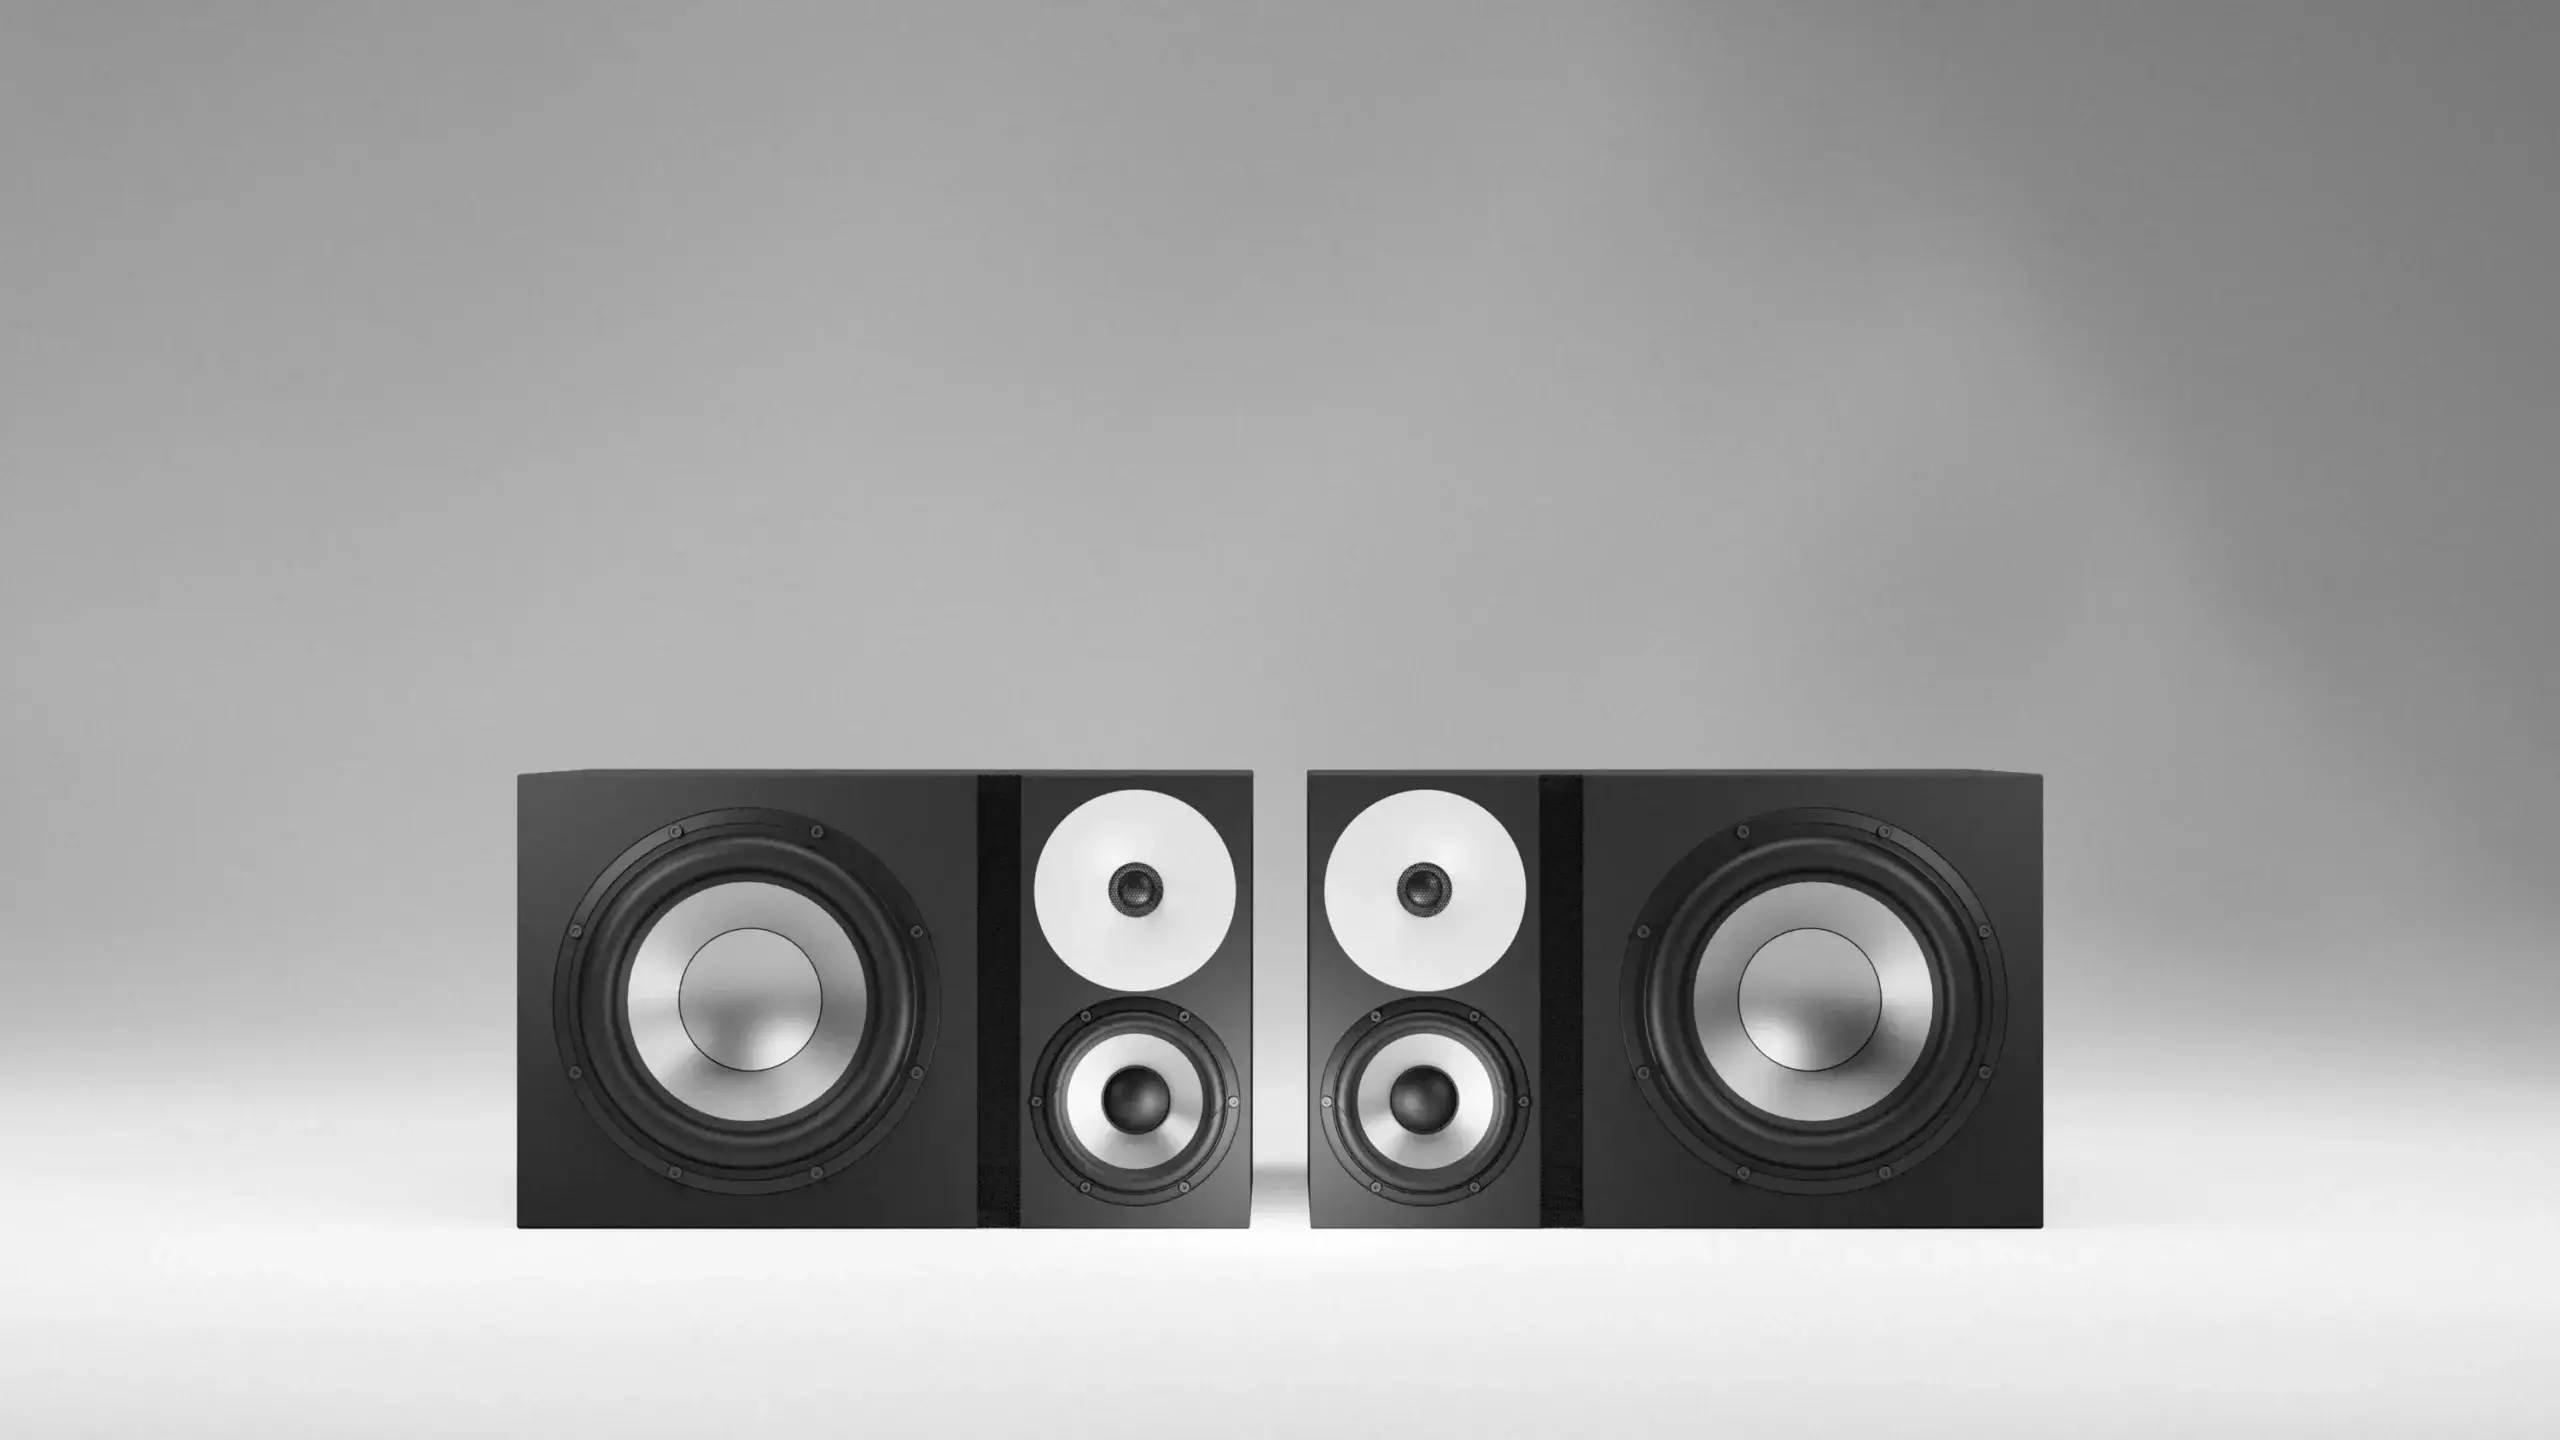 GEAR NEWS: Amphion Announces First 3-Way Active Studio Monitor, One25A